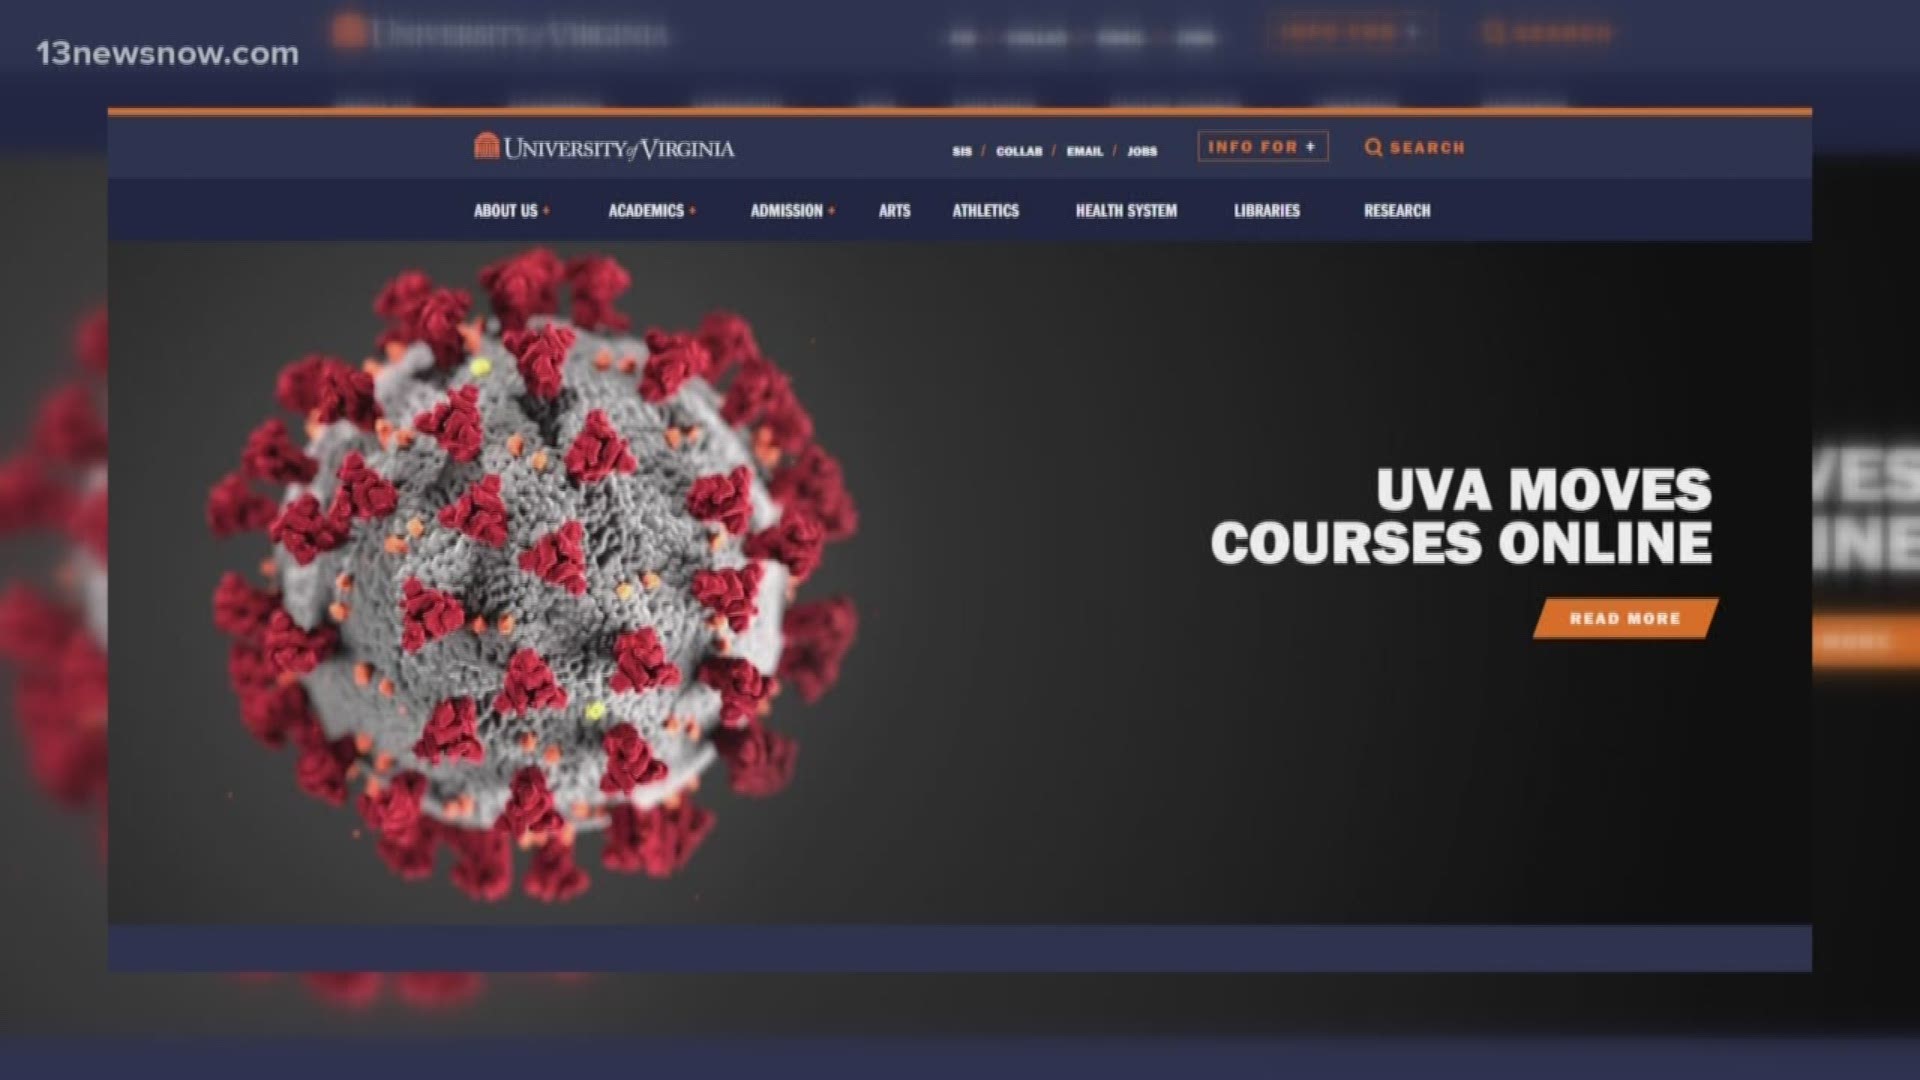 Due to coronavirus concerns, students at William & Mary, James Madison, Virginia Tech, VCU, and the University of Virginia will have to take classes online.